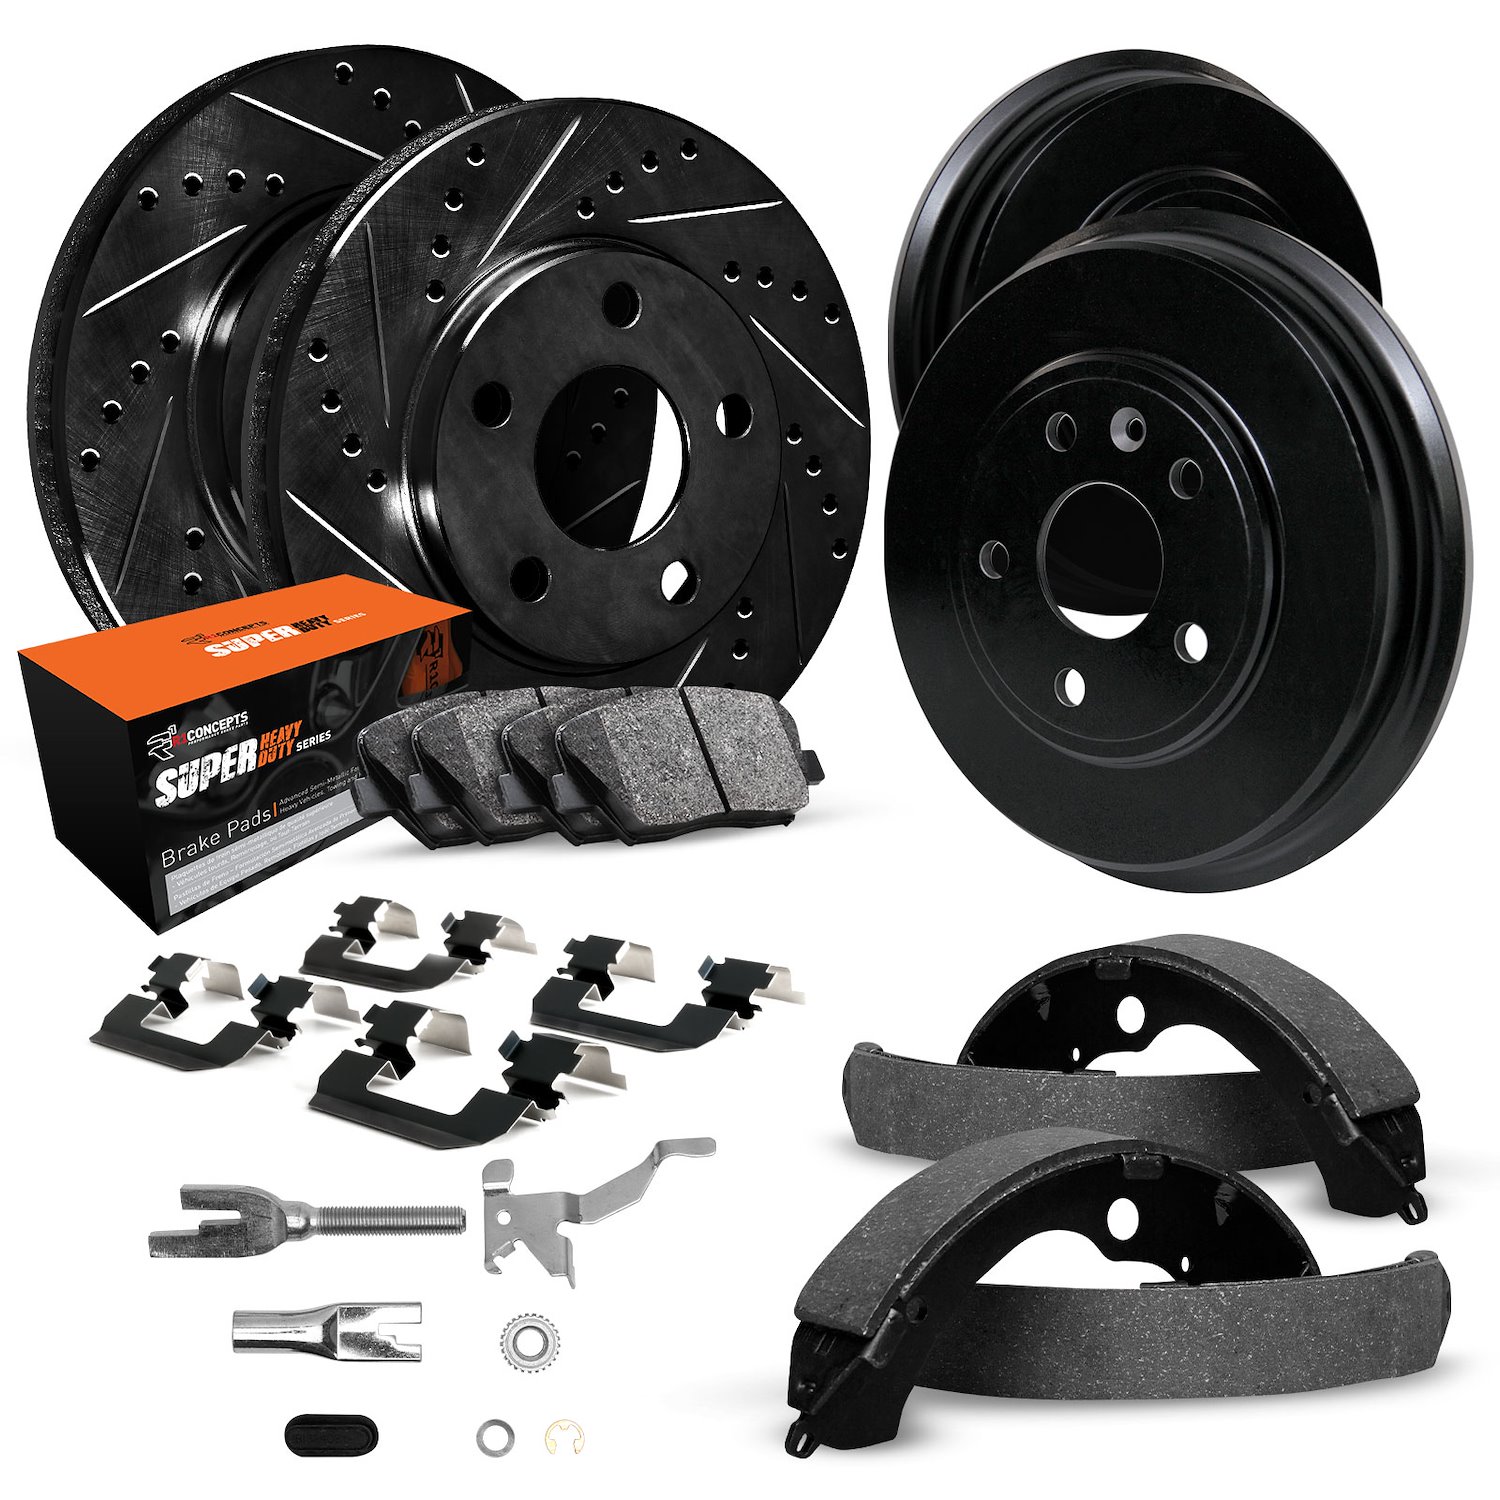 E-Line Drilled/Slotted Black Rotor & Drum Set w/Super-Duty Pads, Shoes, Hardware/Adjusters, 1987-1989 GM